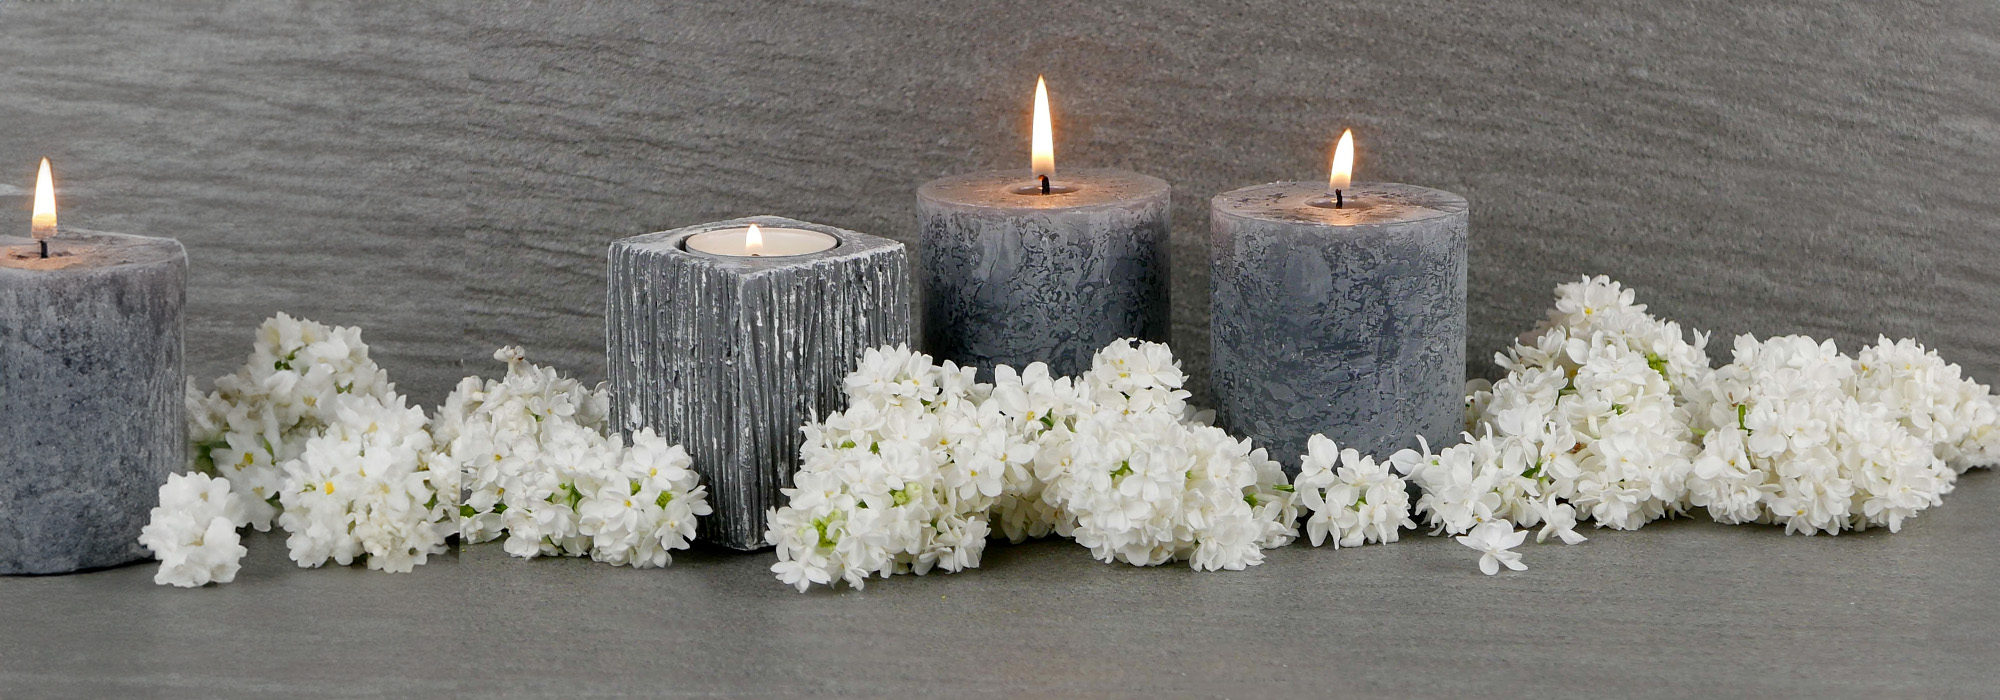 candles and flowers sitting on backdrop